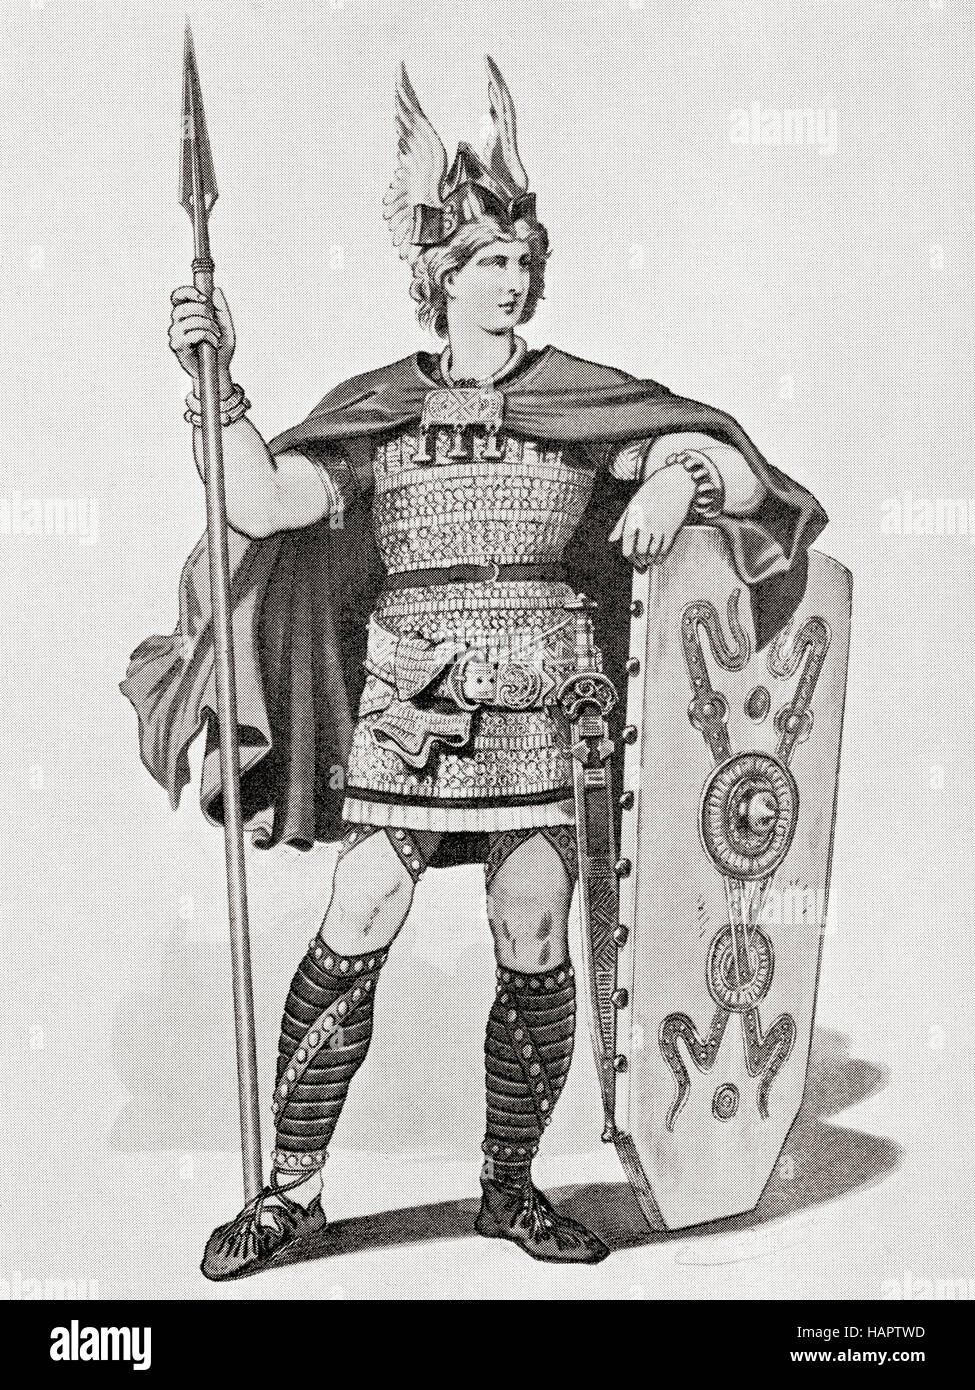 Siegfried.  A costume design made for the Bayreuth production of  Richard Wagner's opera of 1876, Siegfried. Stock Photo